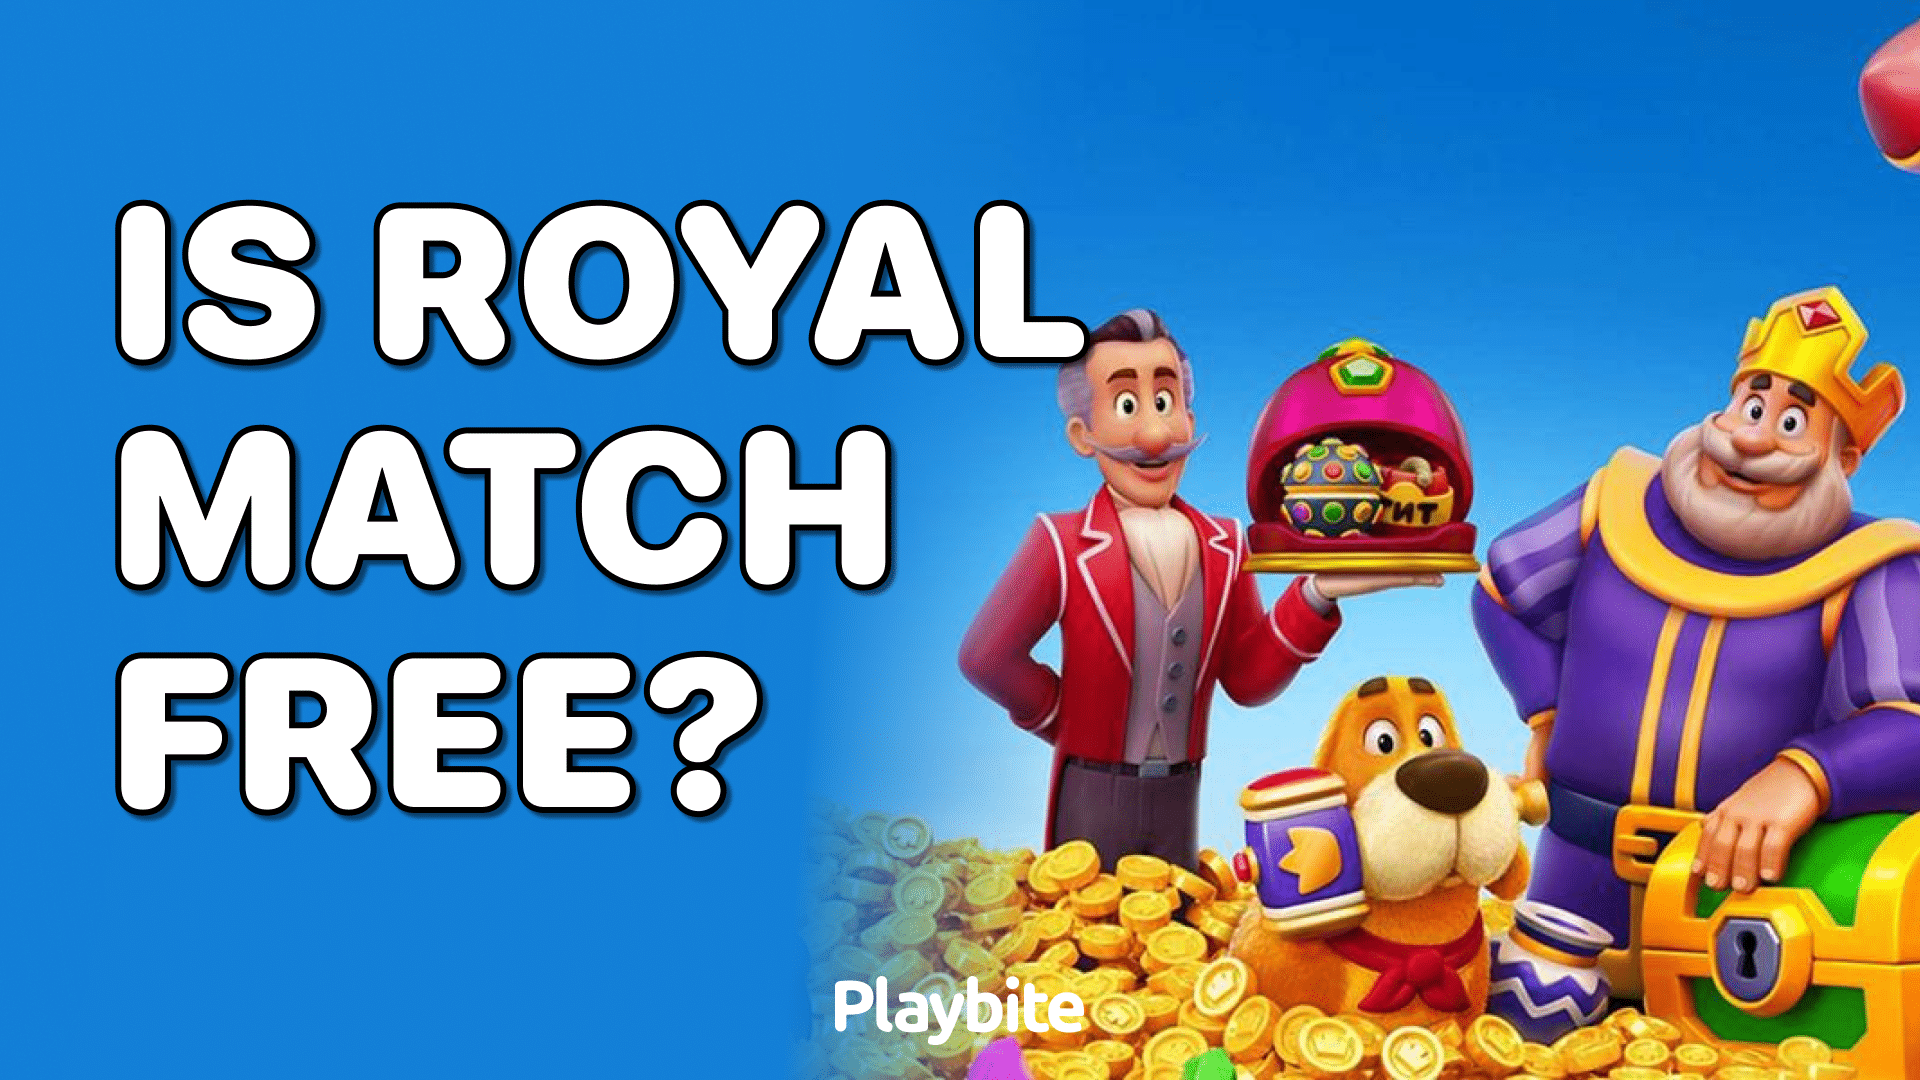 Is Royal Match Free?